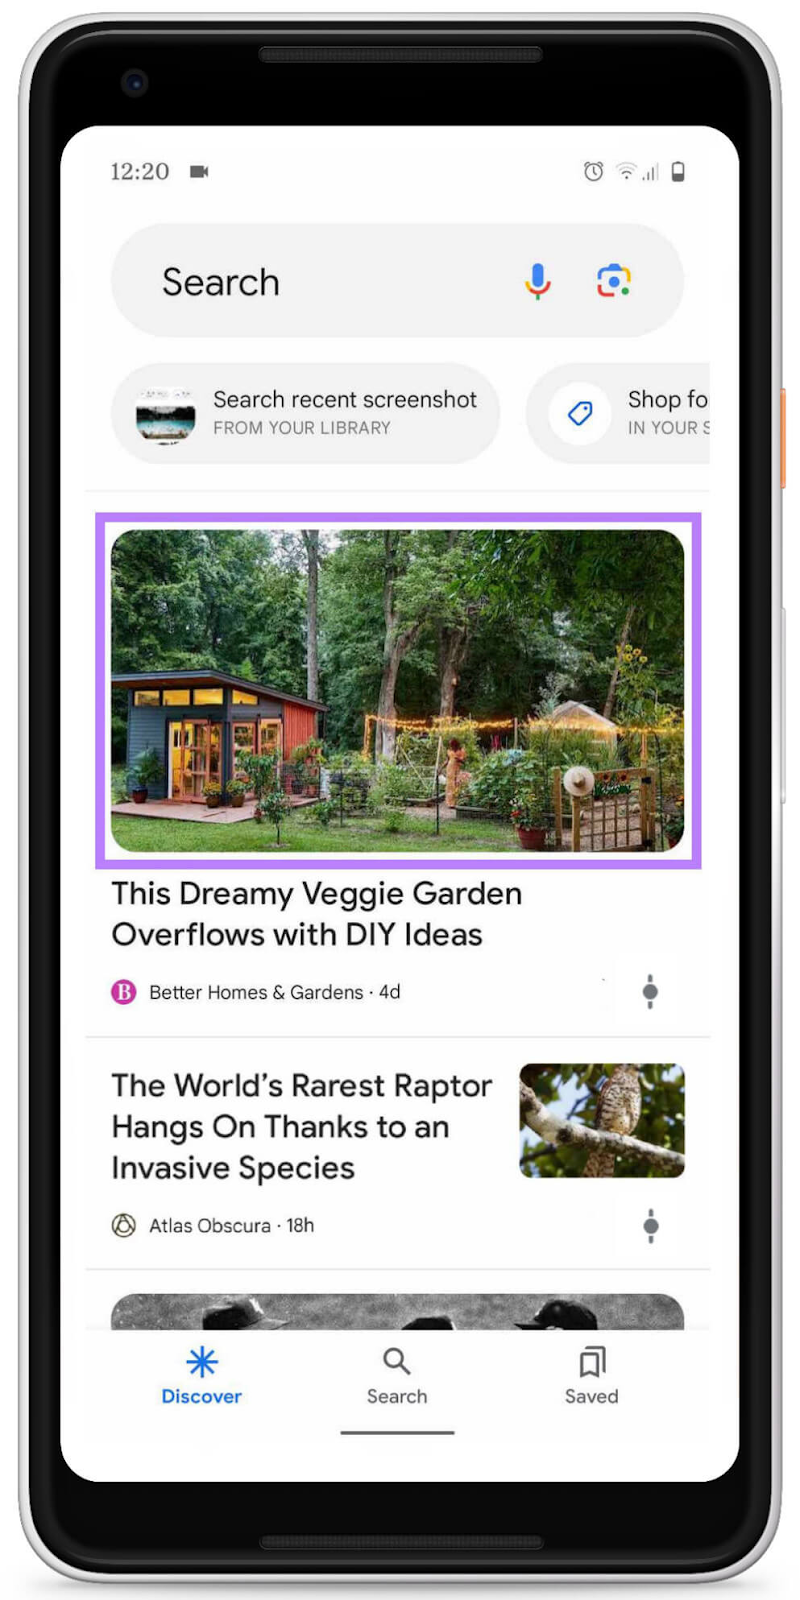 an example of a thumbnail showing a garden in Google Discover for "This Dreamy Veggie Garden Overflows with DIY Ideas" post